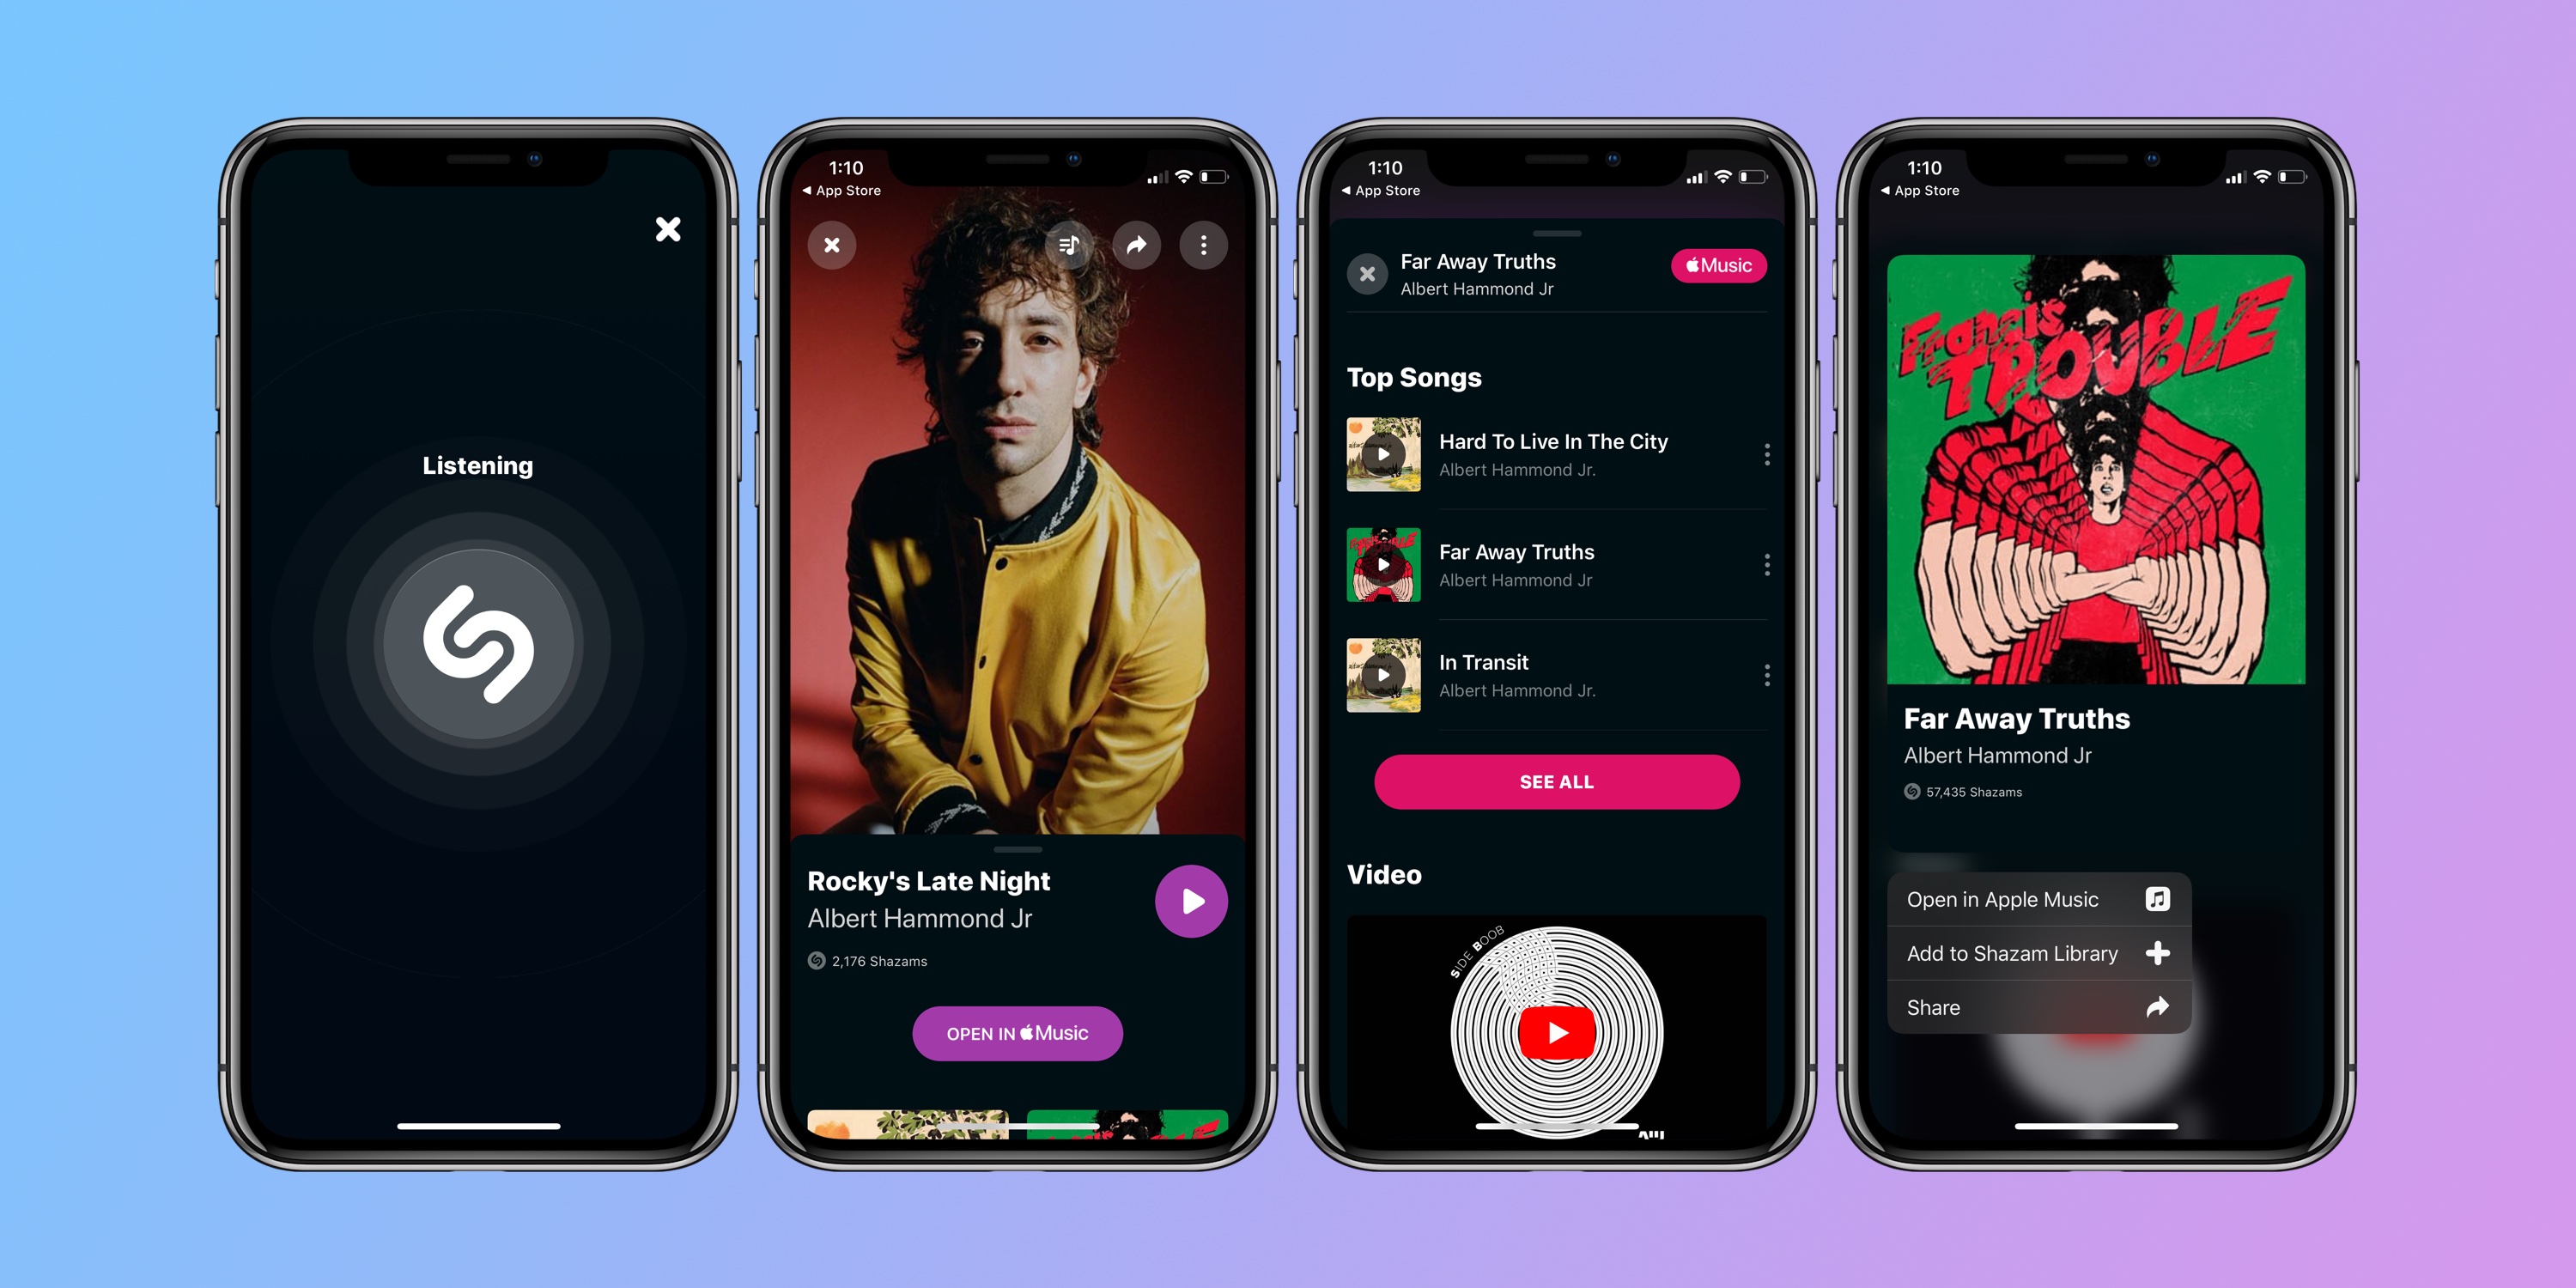 Shazam app updated with Dark Mode support for iOS 13 - 9to5Mac